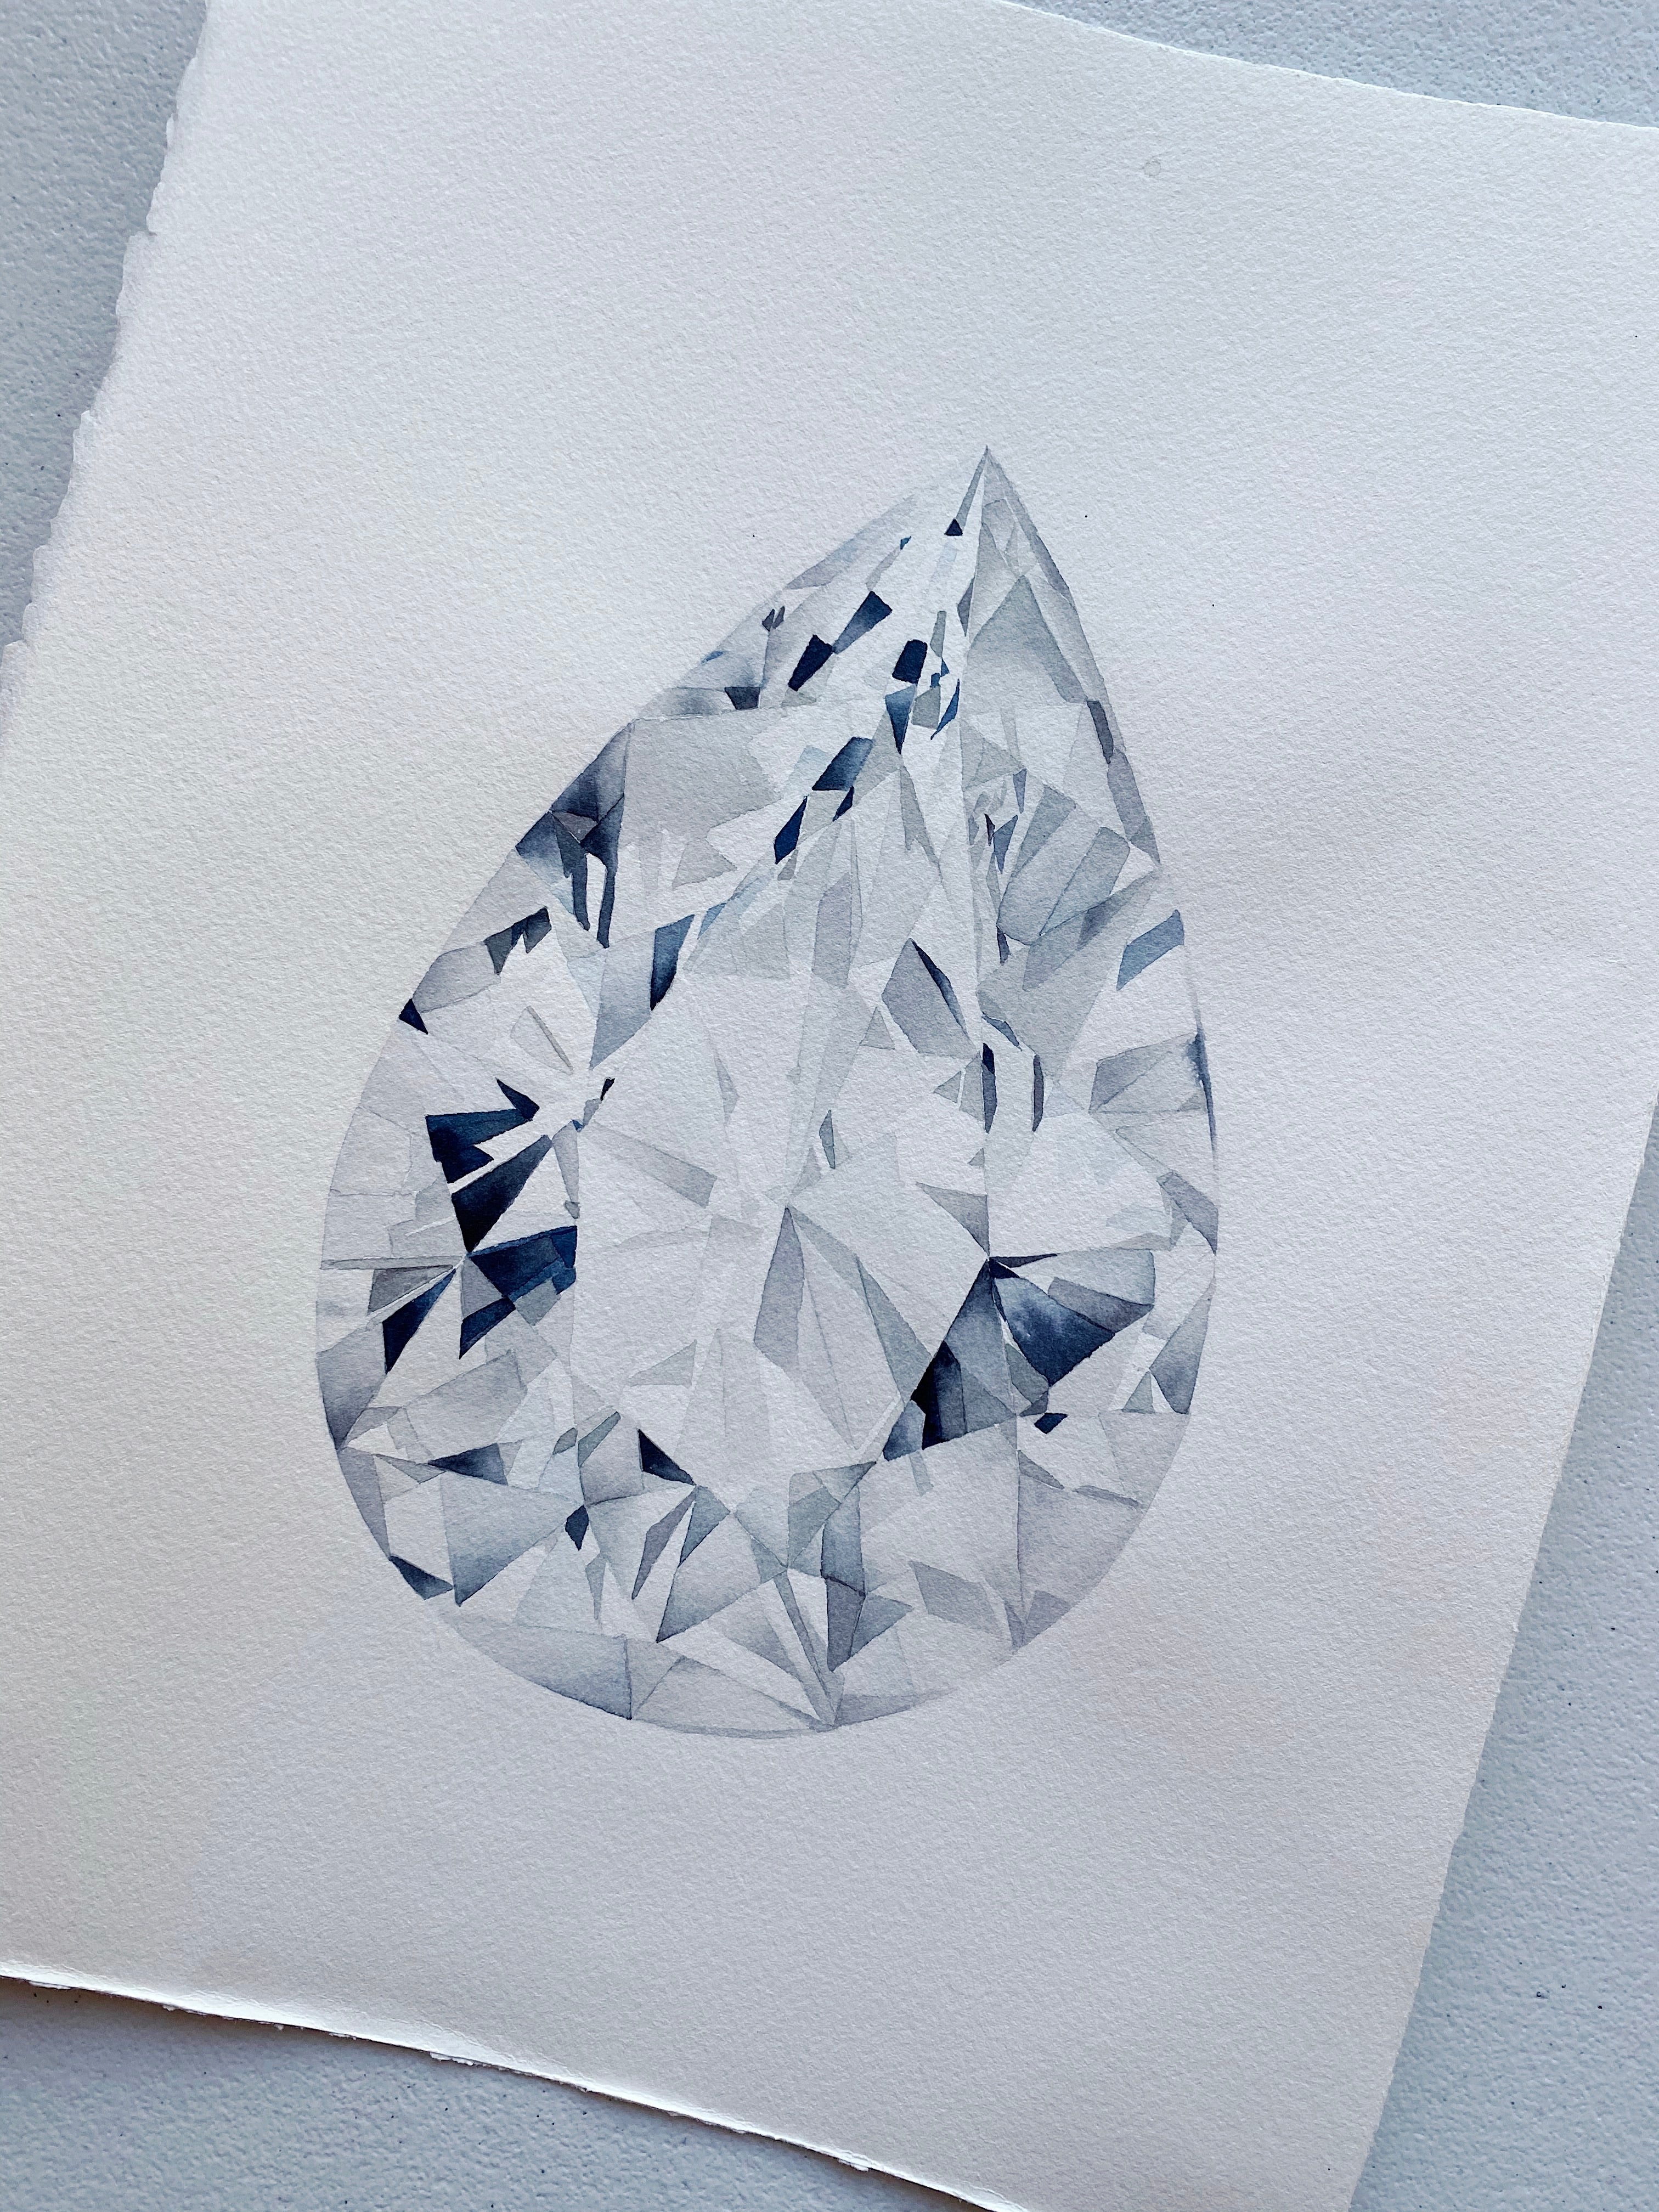 Original Painting - Watercolor Pear Cut Diamond Painting 11x15 inches